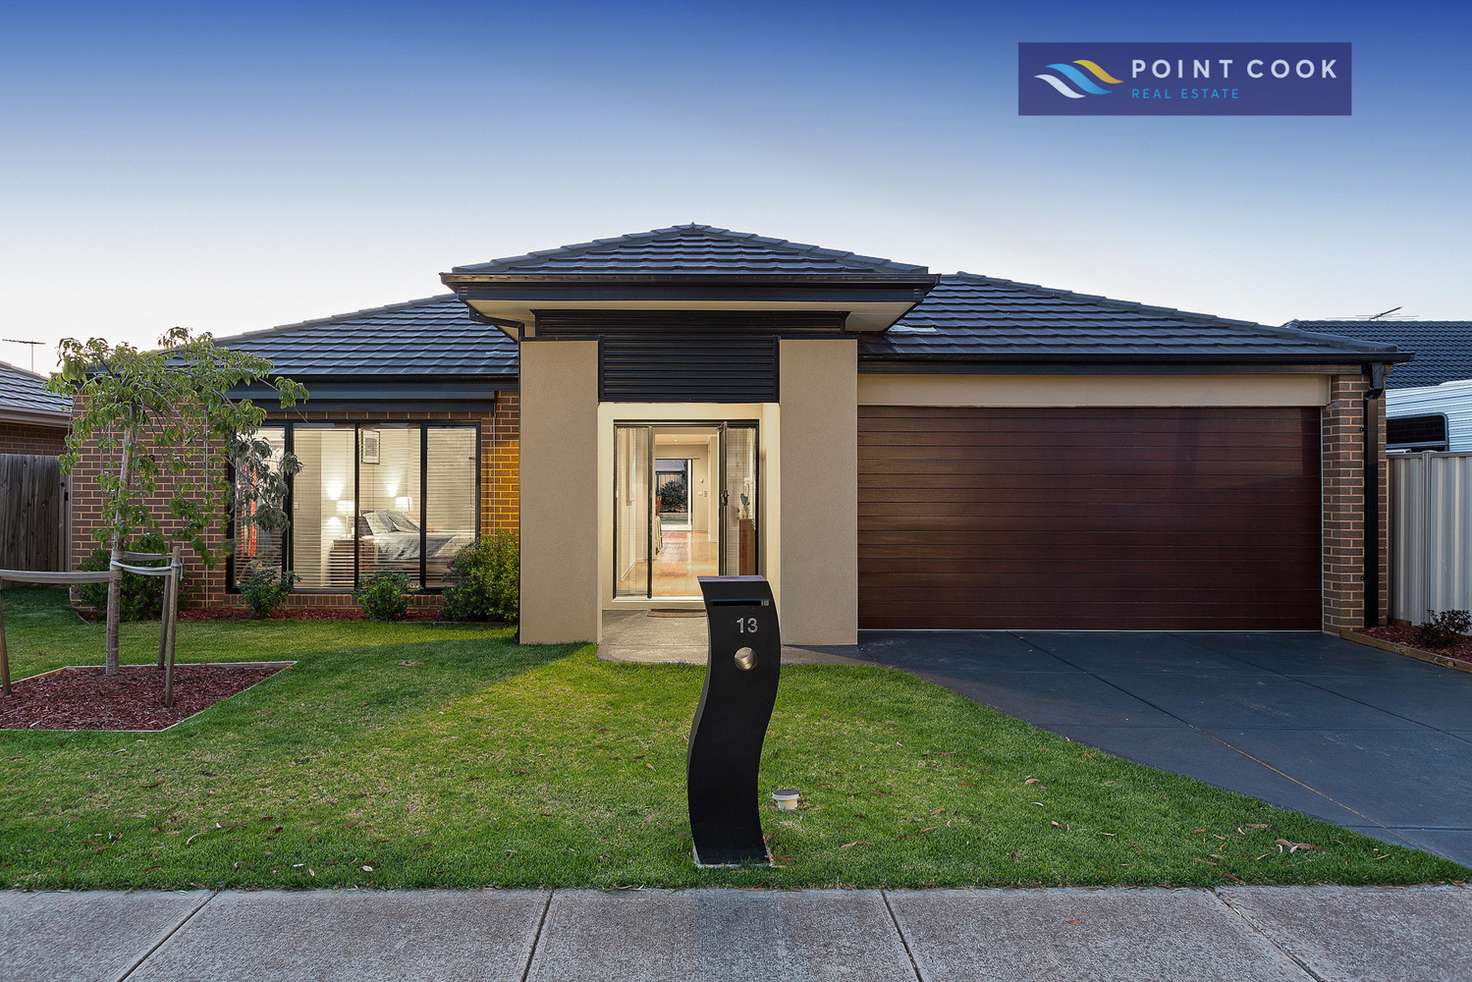 Main view of Homely house listing, 13 Pinoak Street, Point Cook VIC 3030